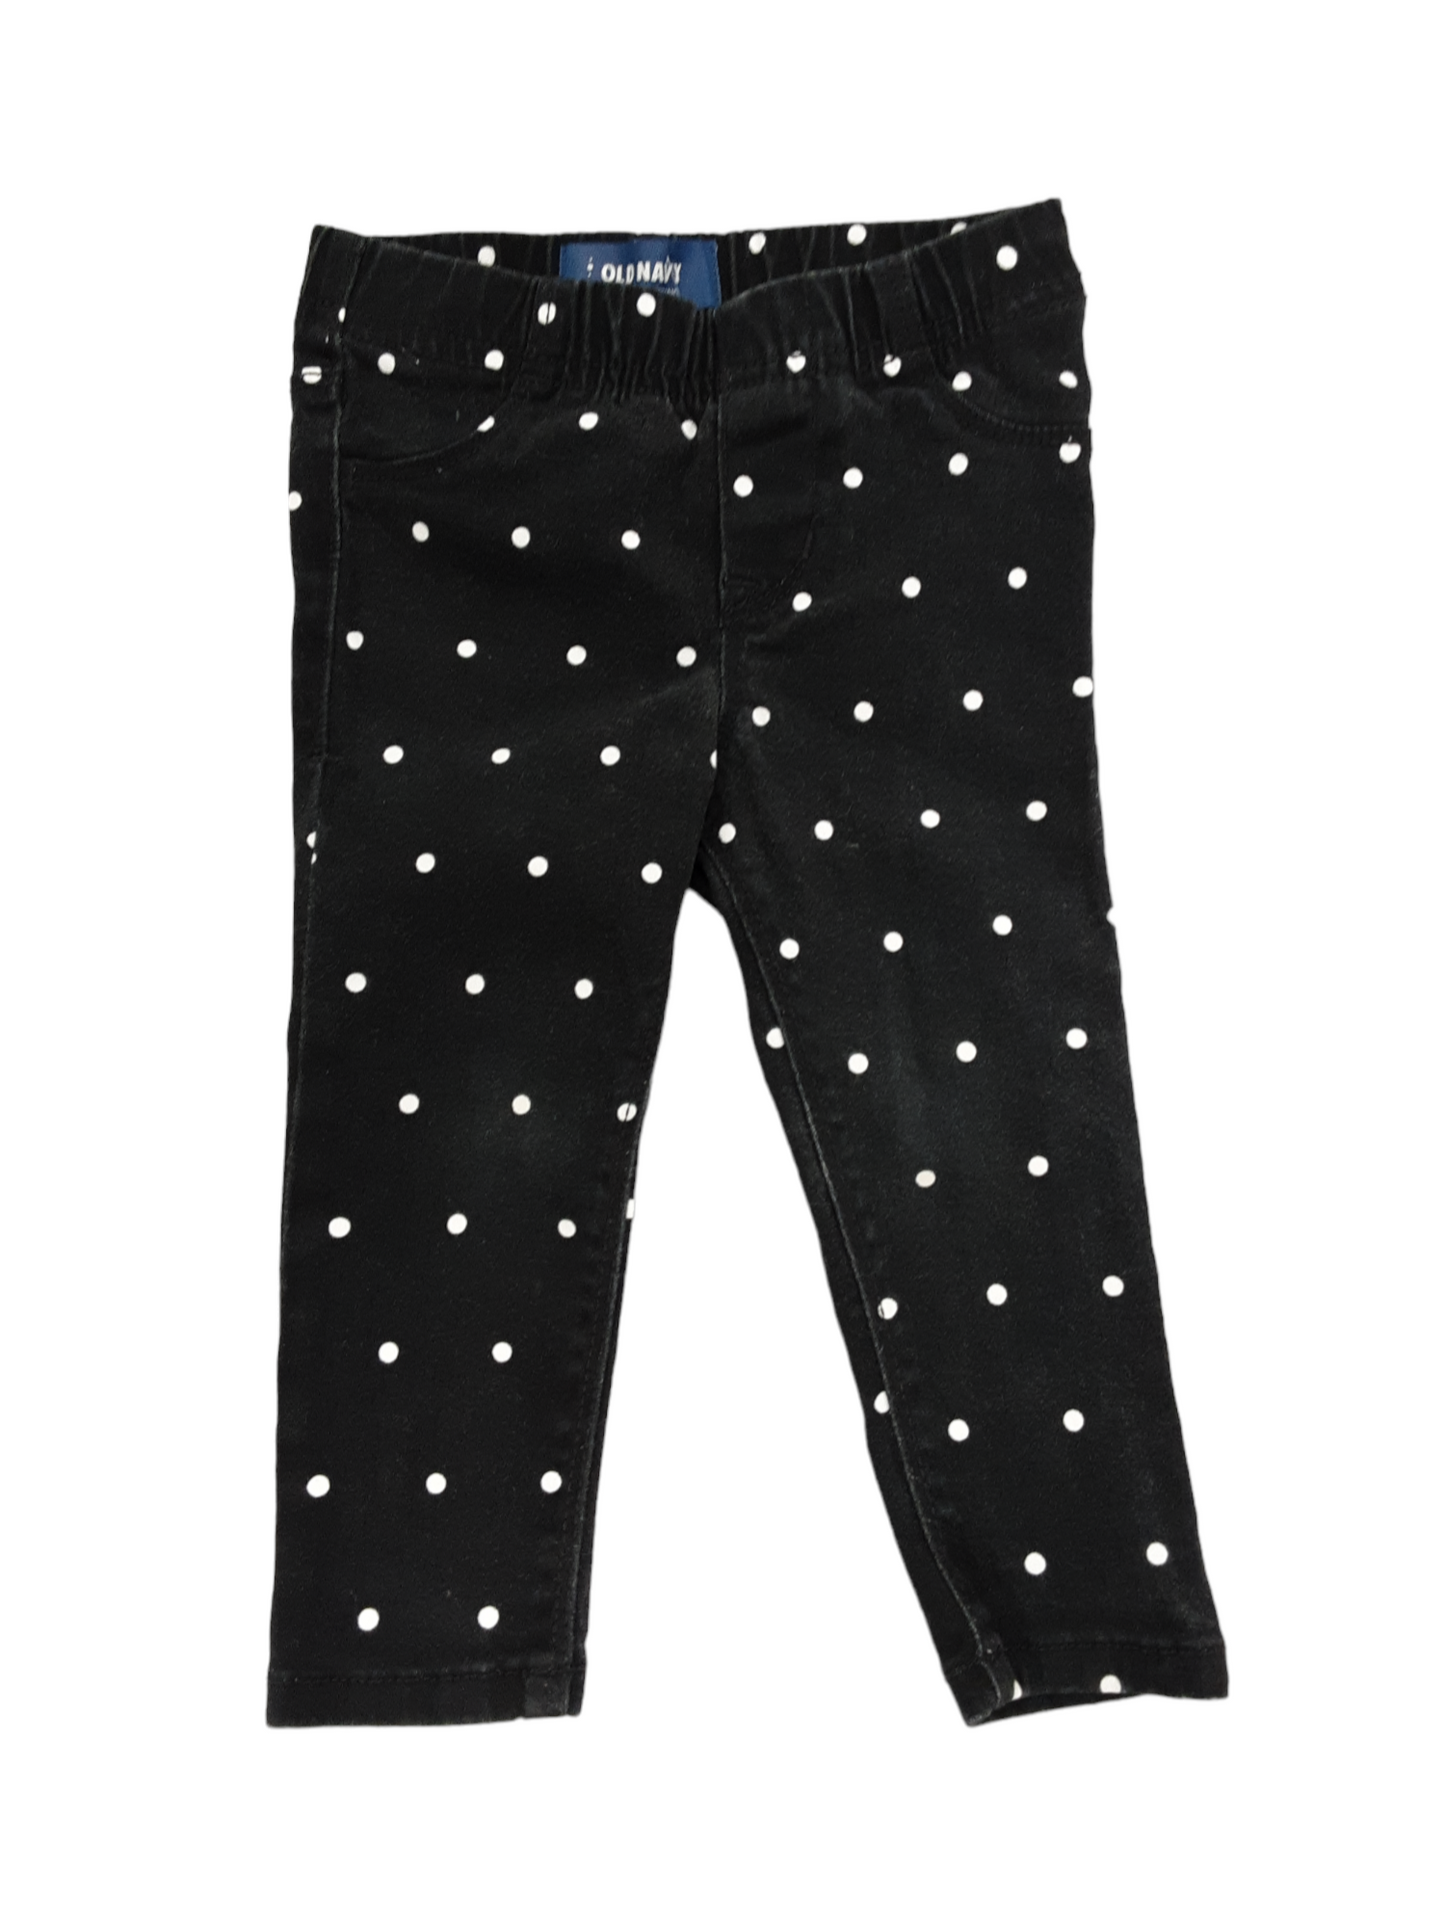 Polka dot jeggings size 18 to 24 months